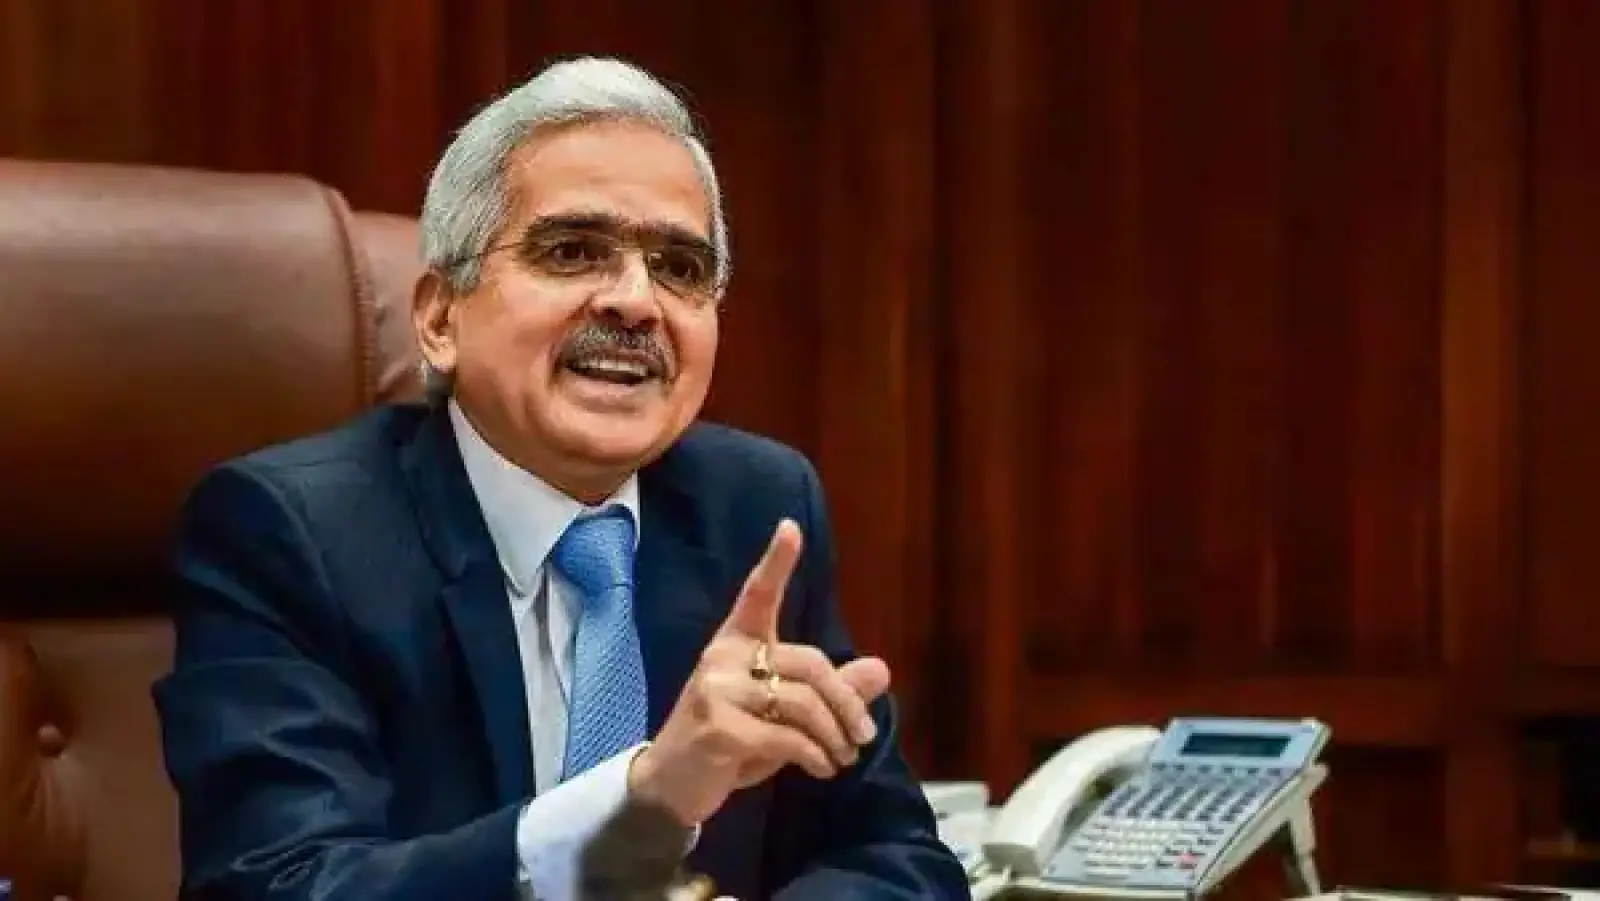 RBI: 'Our financial system is in a stronger position than before the Covid crisis', said Shaktikanta Das